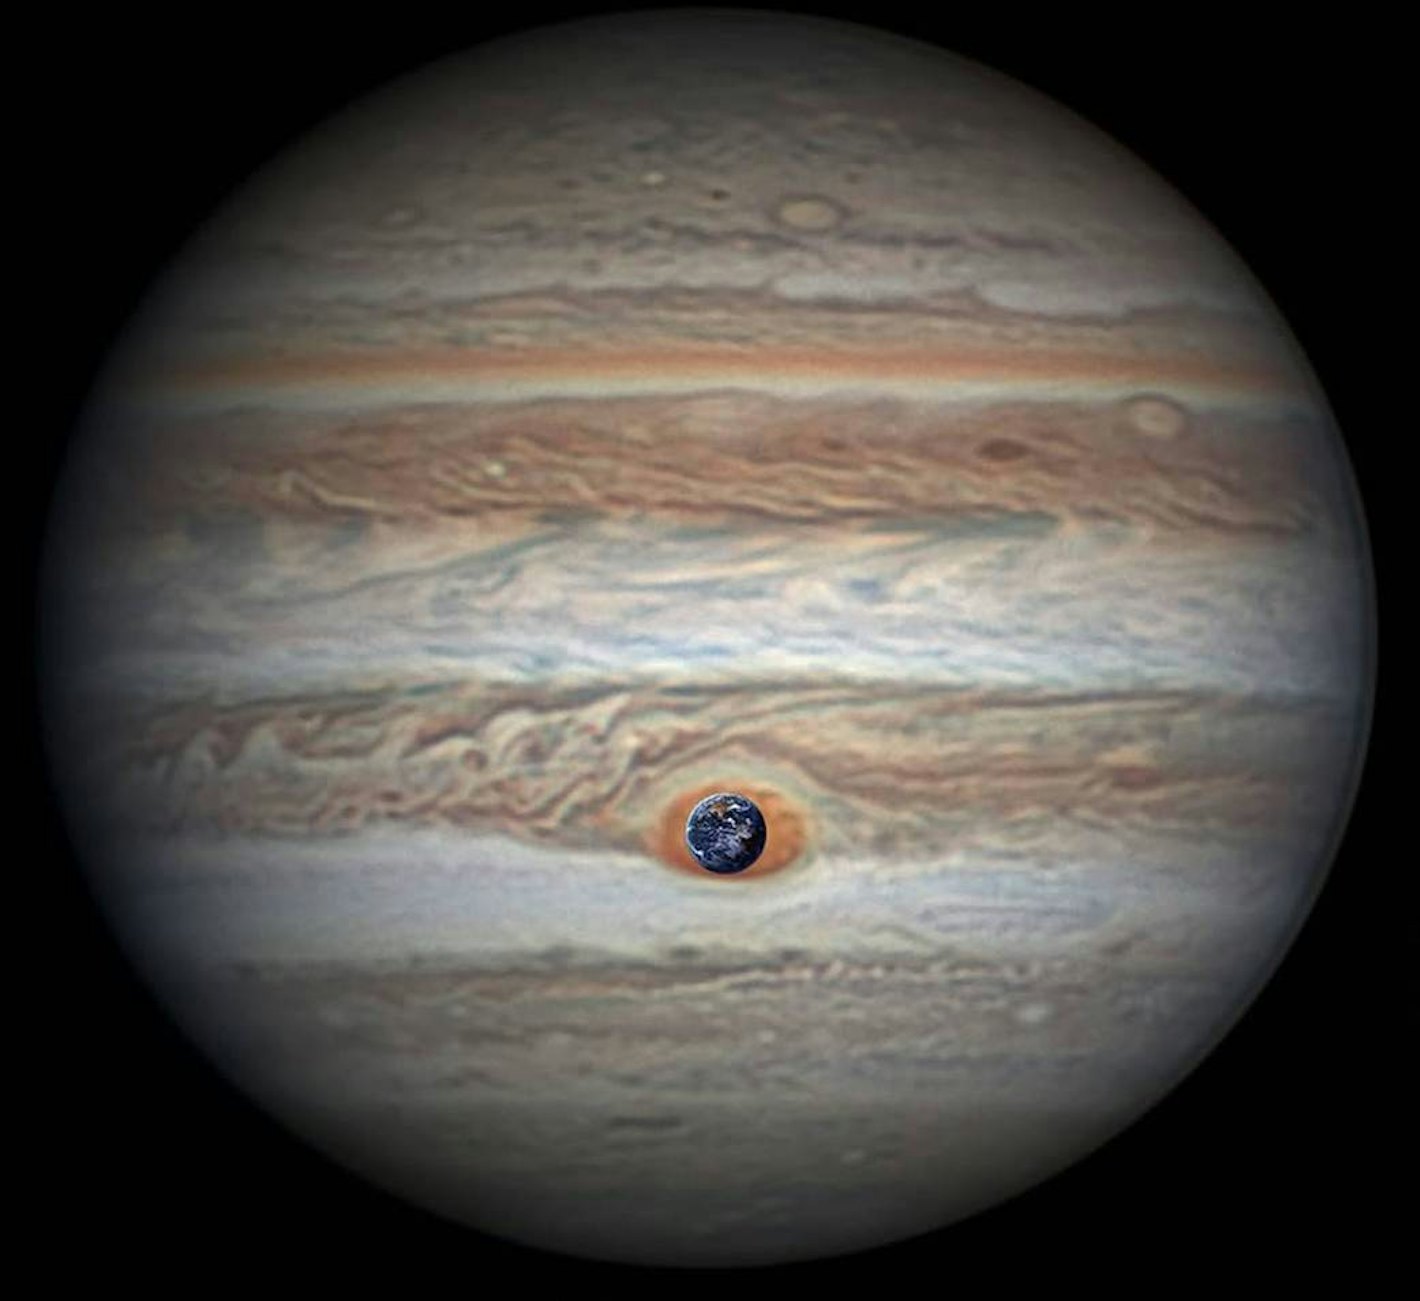 Why Is Jupiters Great Red Spot Shrinking